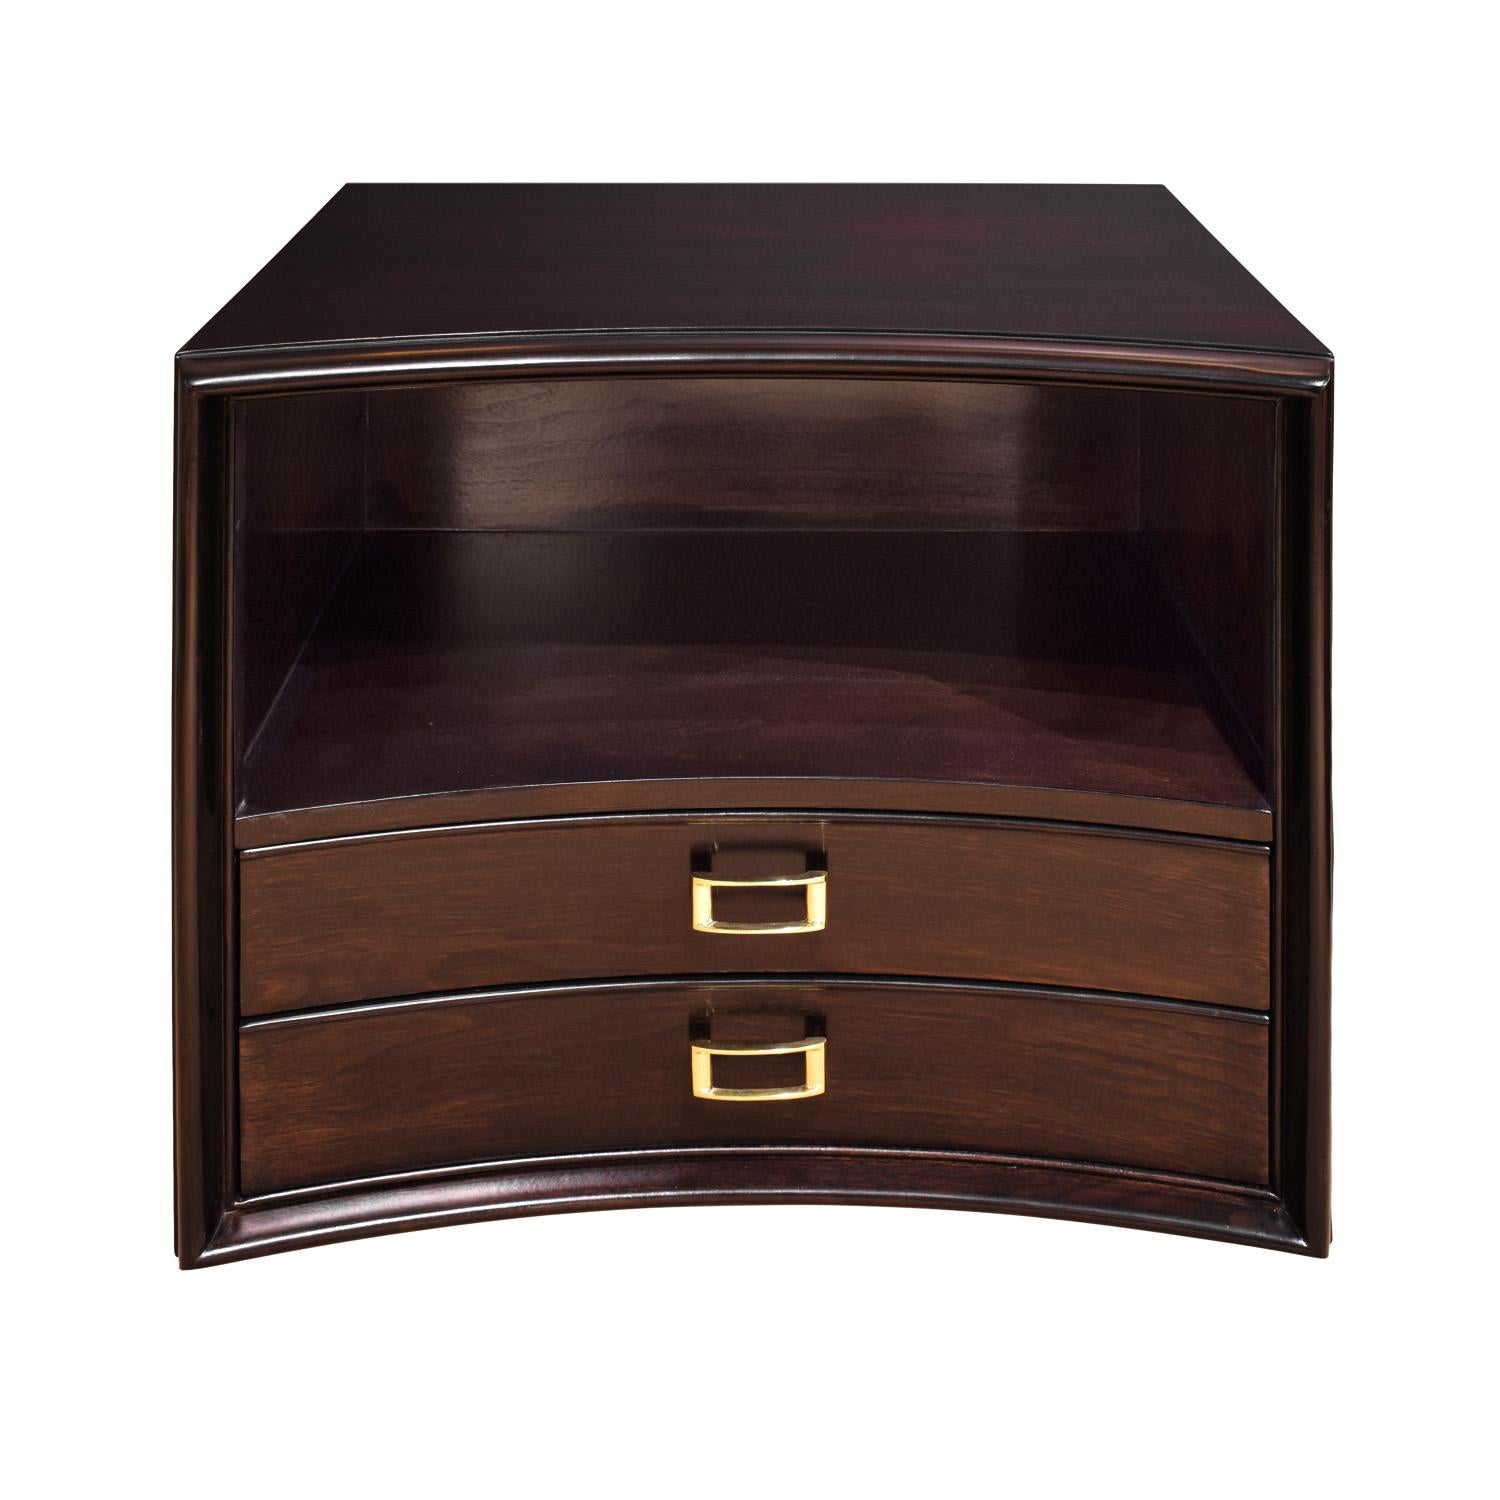 Pair of bedside tables in dark walnut with gently curved fronts, 2 drawers, and brass buckle pulls by Paul Frankl for Johnson Furniture, American 1950's (signed). These have been newly refinished and the pulls have been cleaned and polished. A